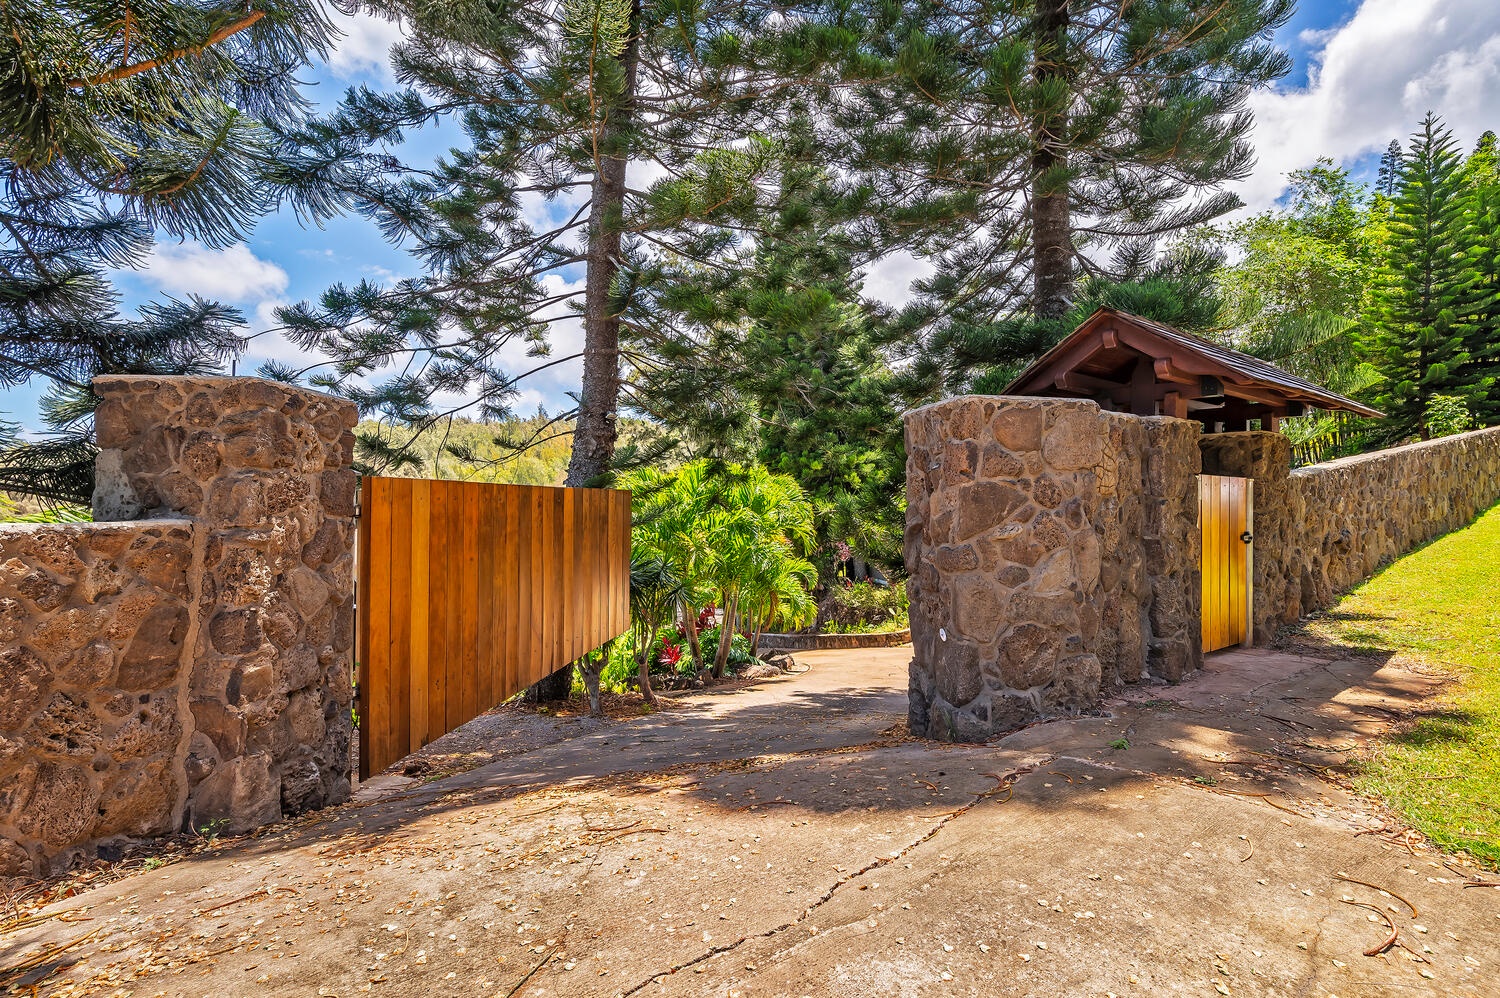 Haleiwa Vacation Rentals, Mele Makana - Gated access ensures seclusion and privacy